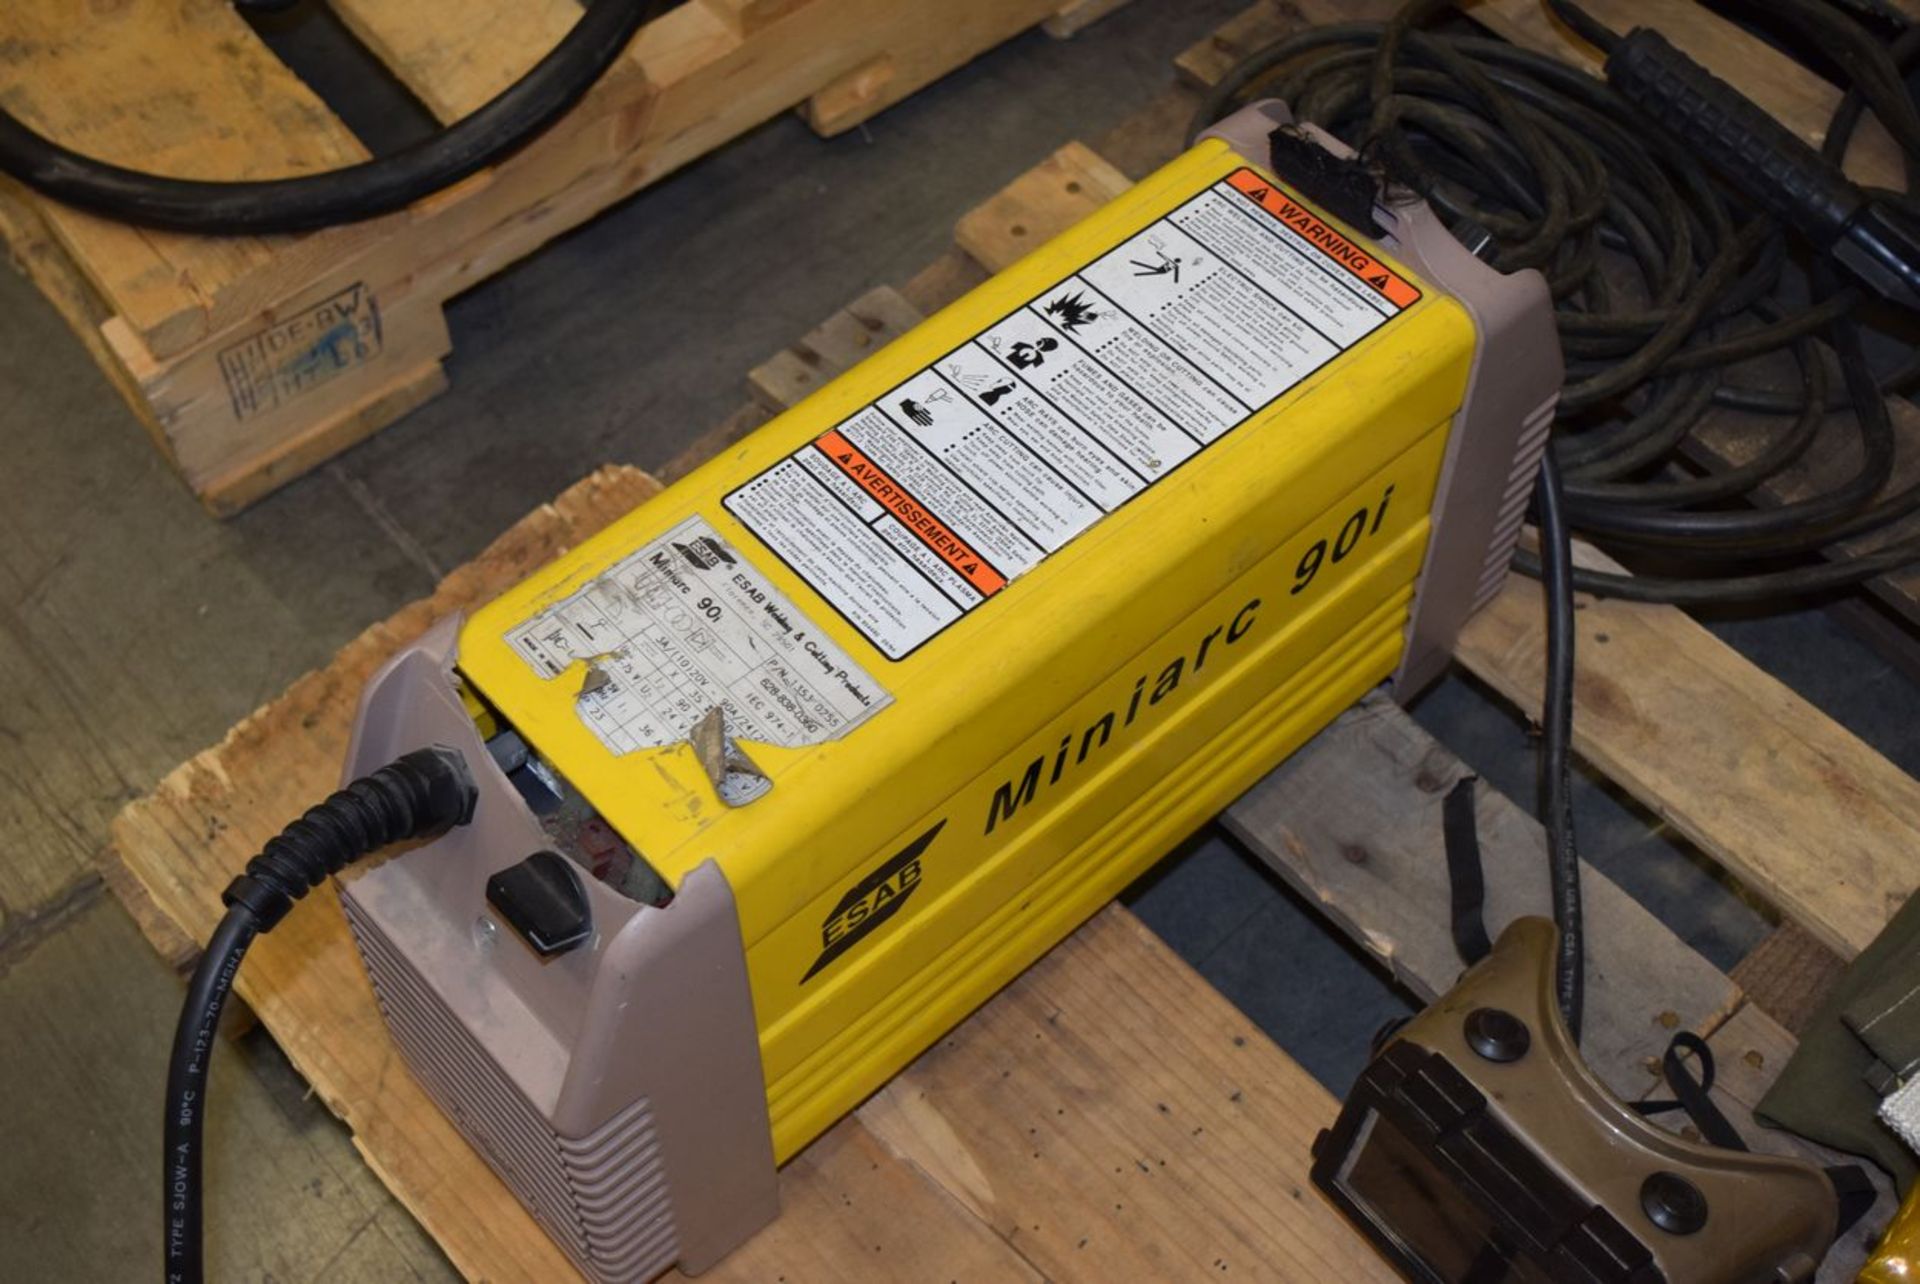 ESAB MINIARC 90i WELDER AND WELDING SUPPLIES- REMOVAL $25 - Image 2 of 3